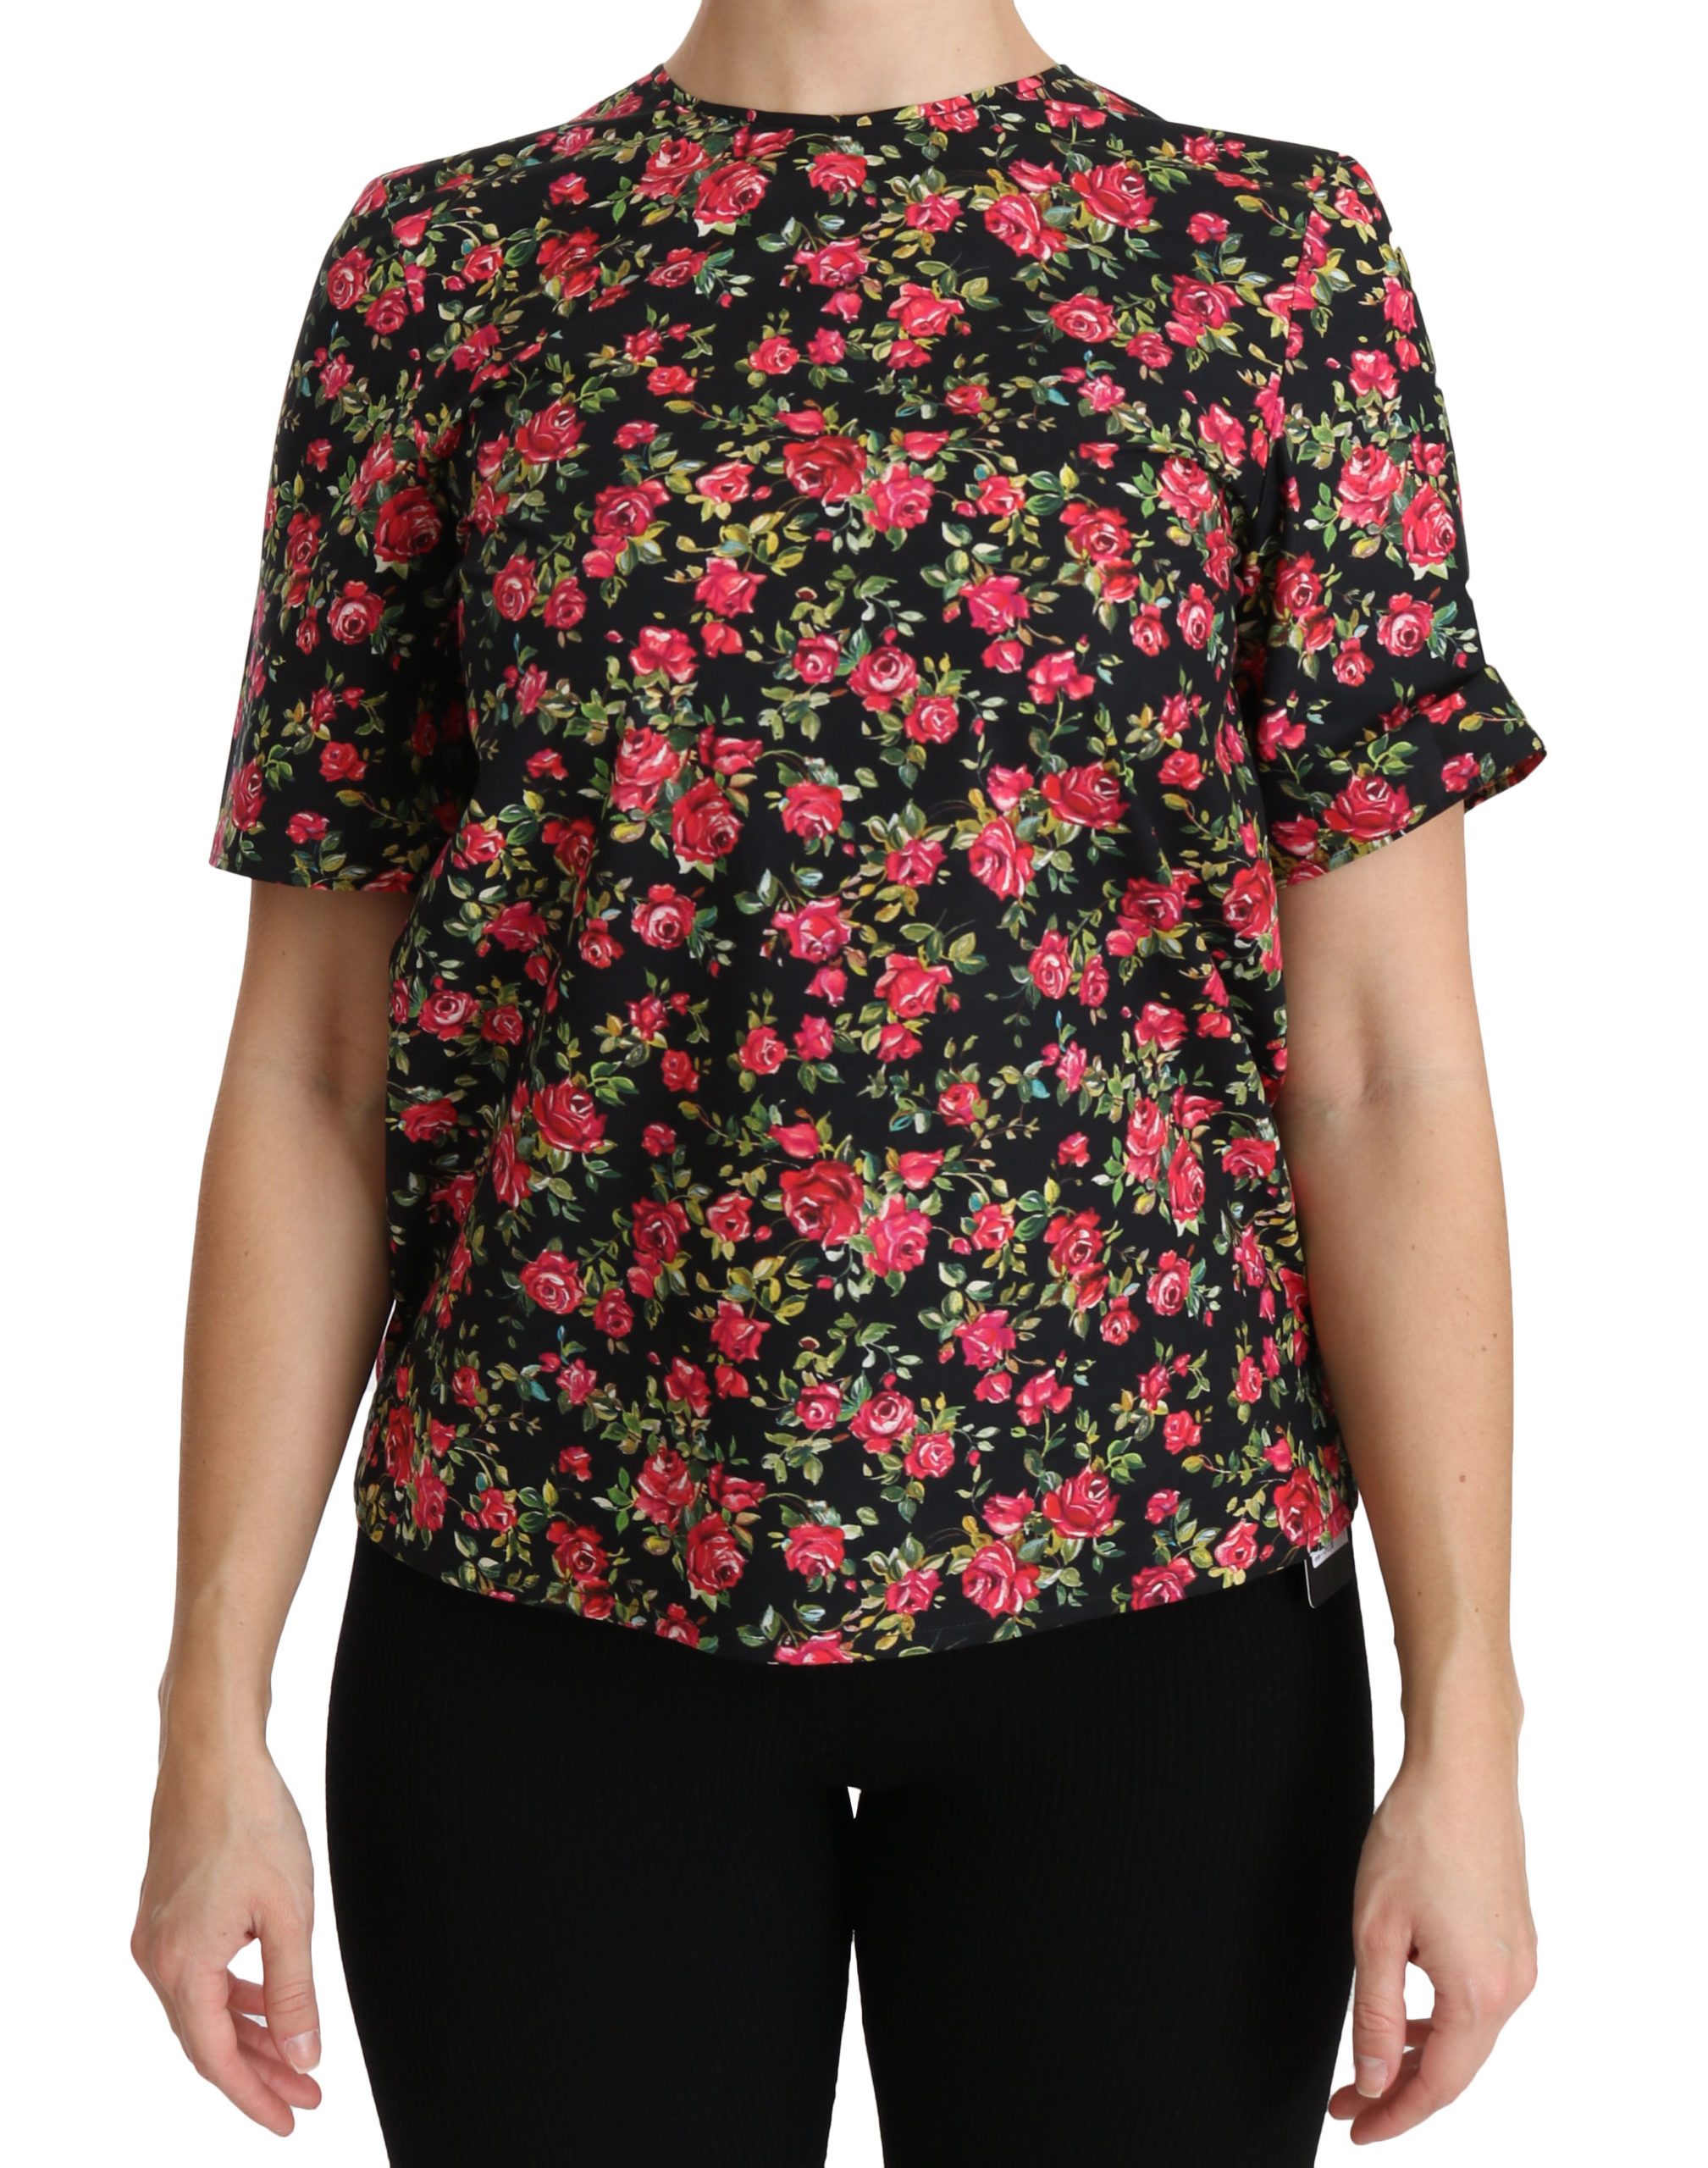 Black Floral Roses Short Sleeve Top Blouse - IT36 | XS